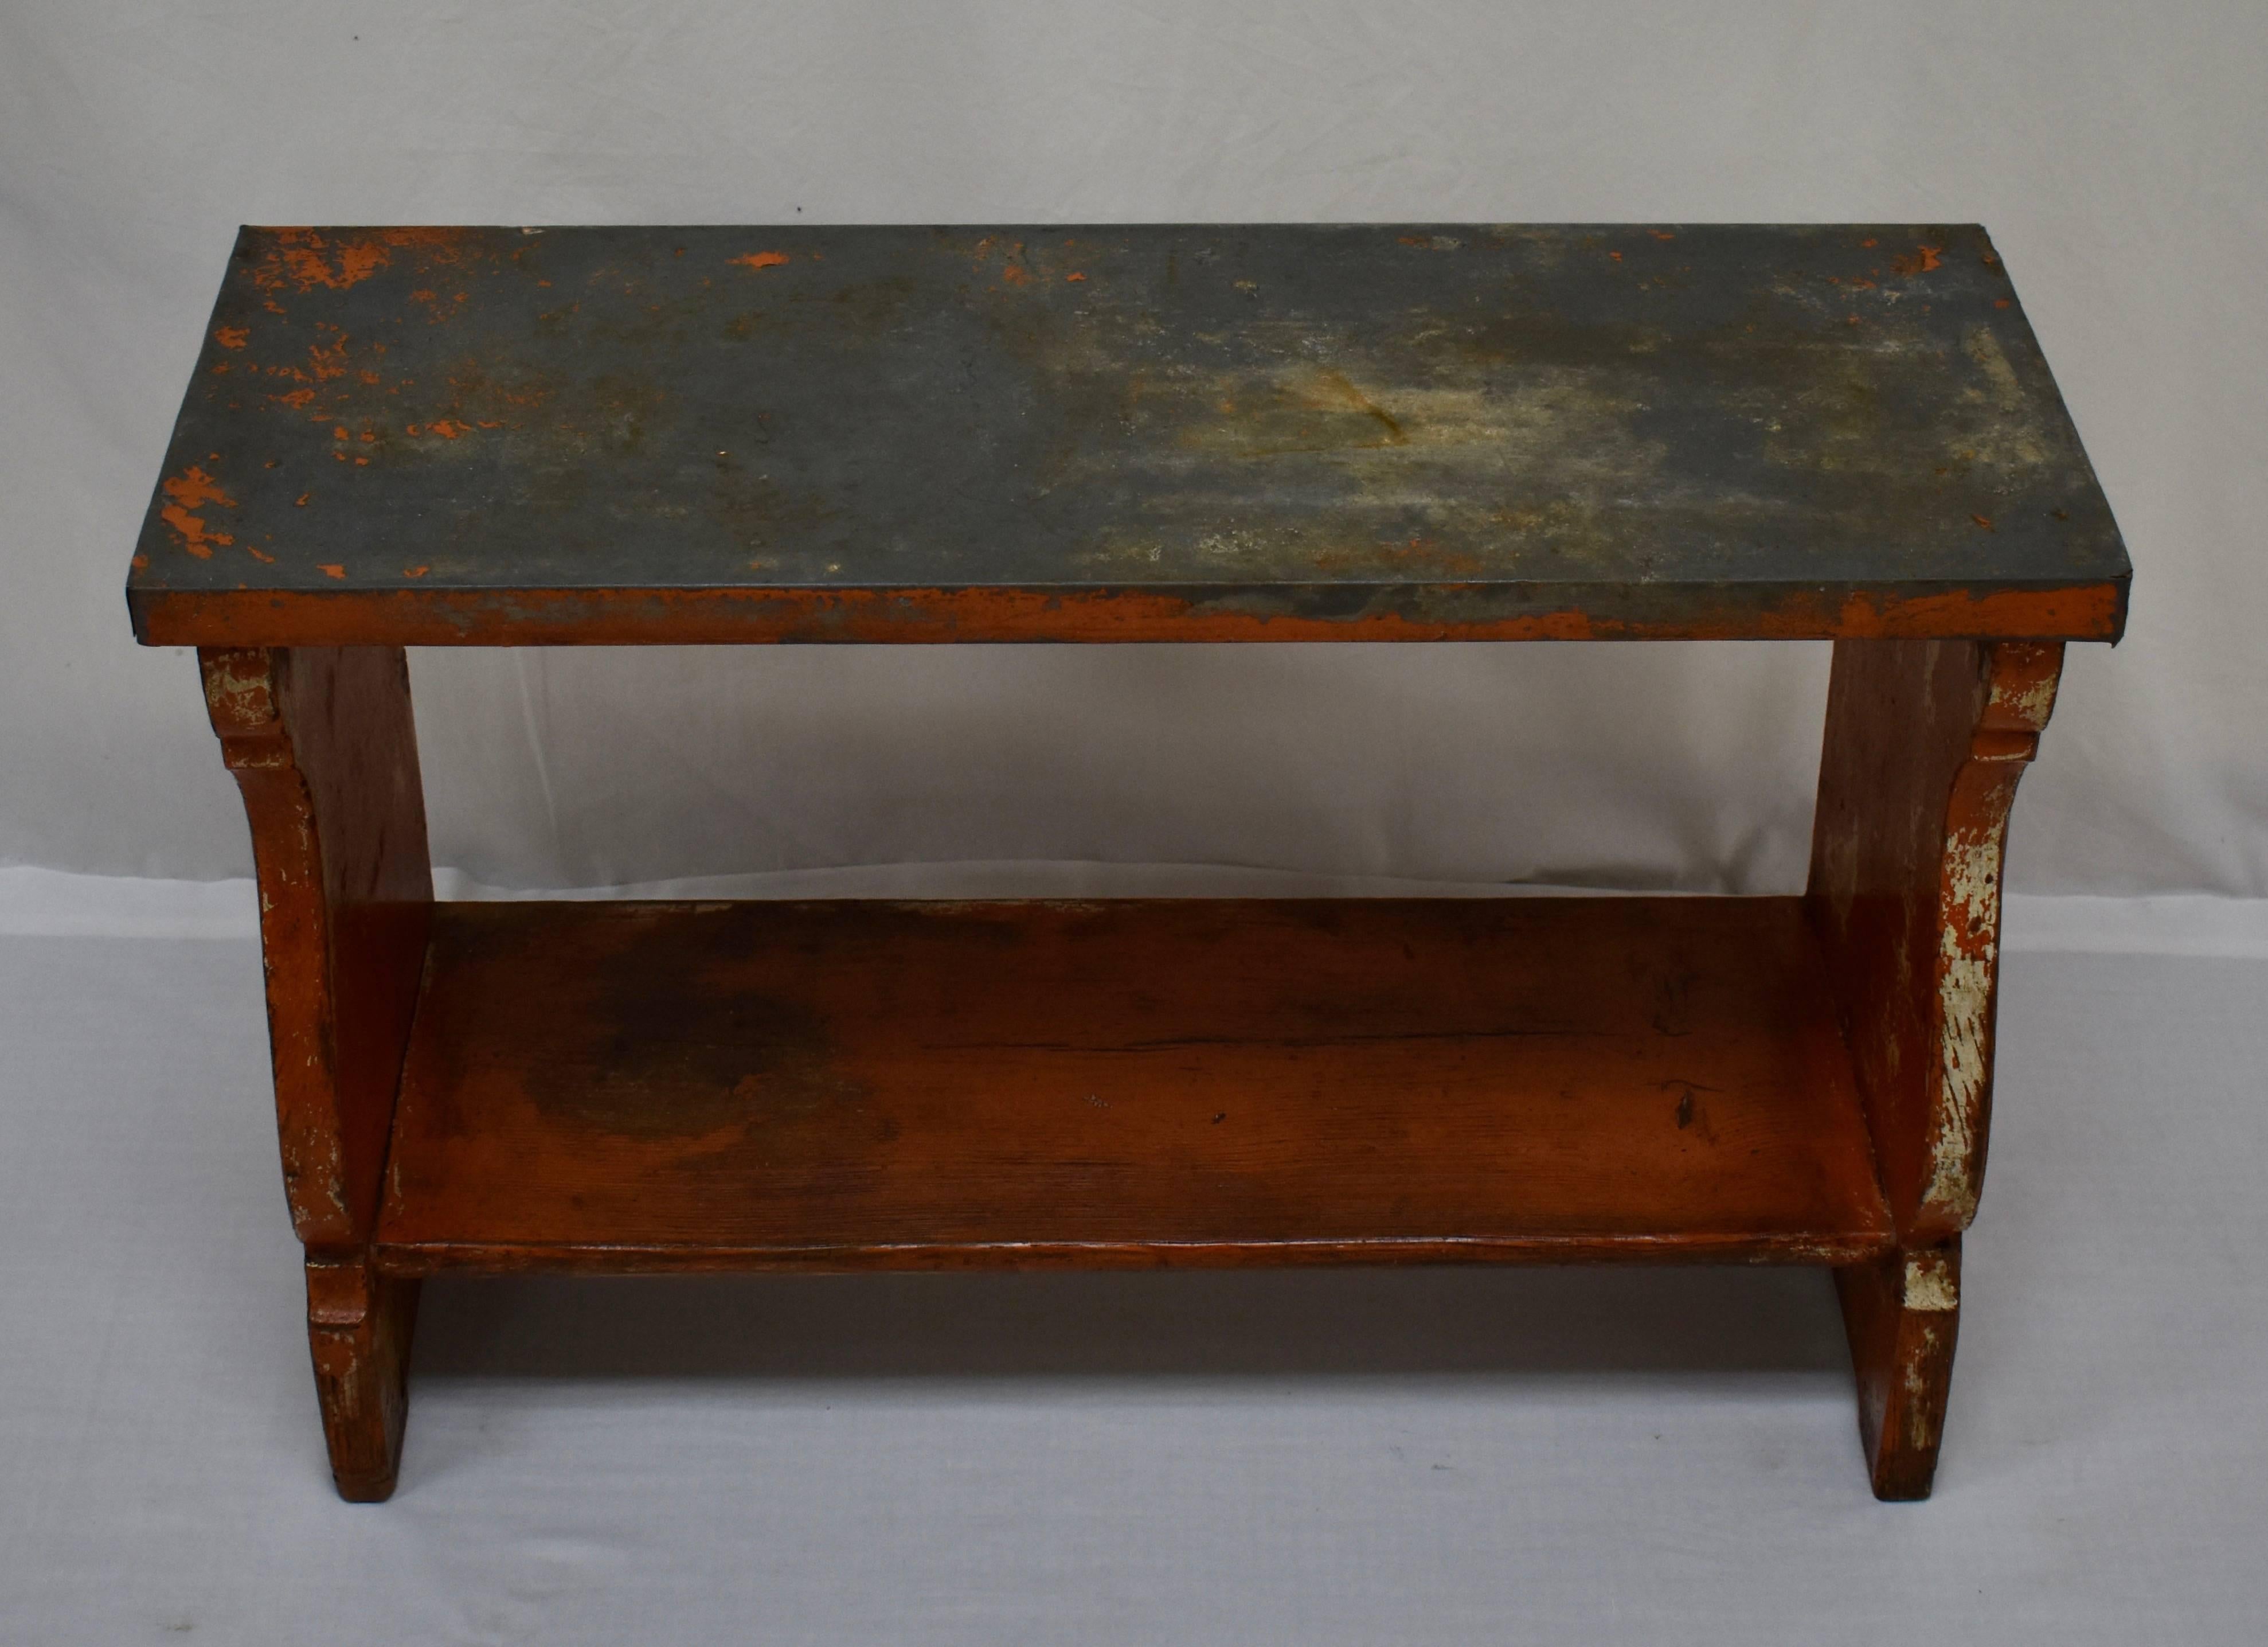 Hungarian Pine Painted Zinc-Topped Water Bench